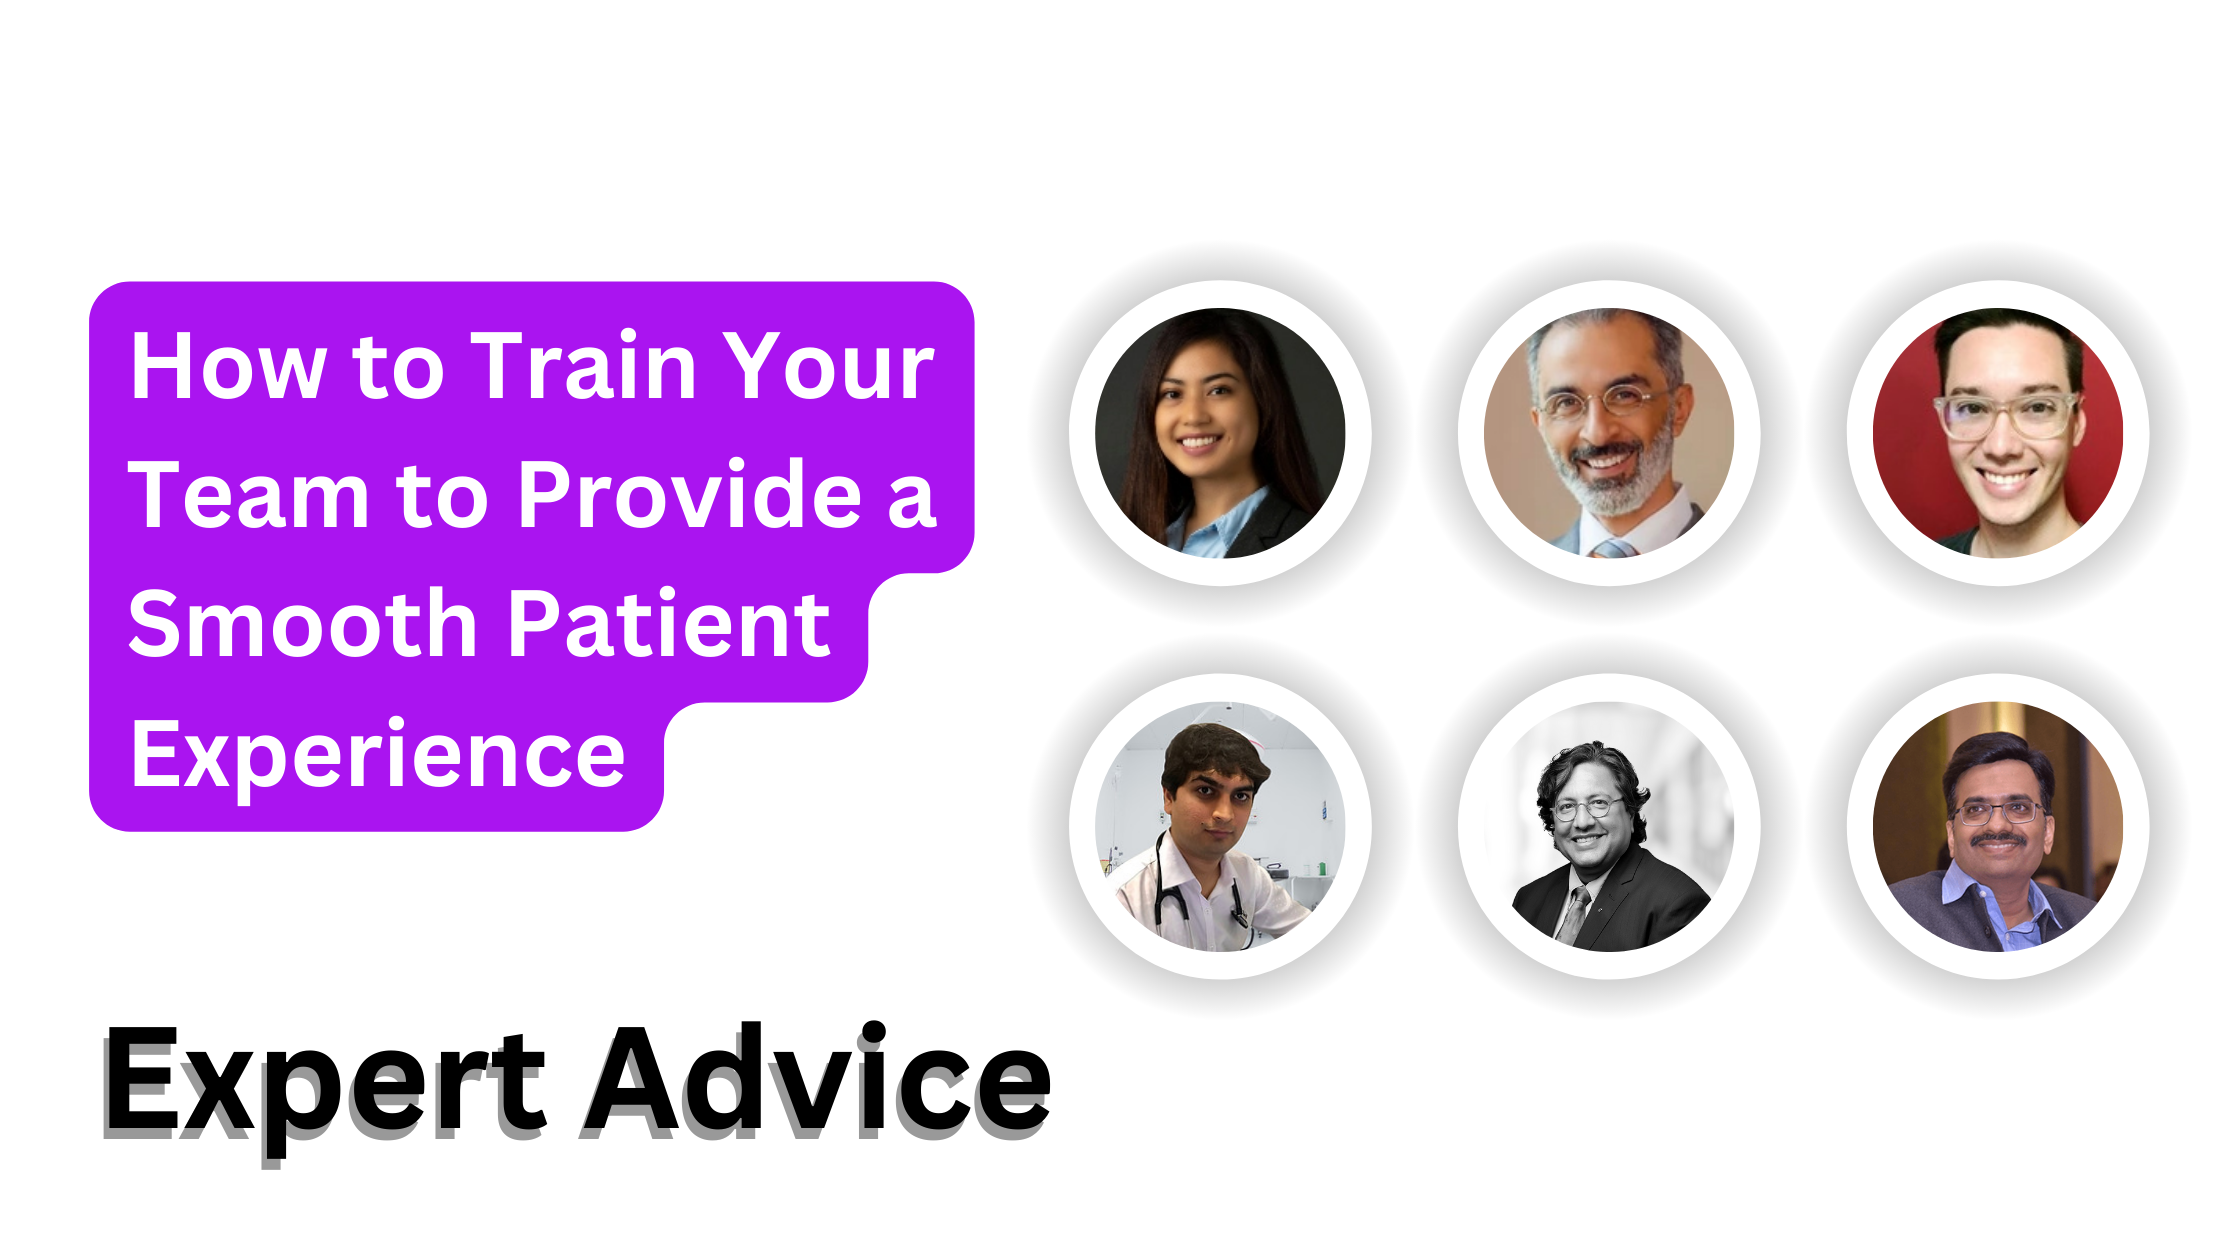 Building a Dream Team: Expert Advice to Train Your team in Exceptional Patient Experiences